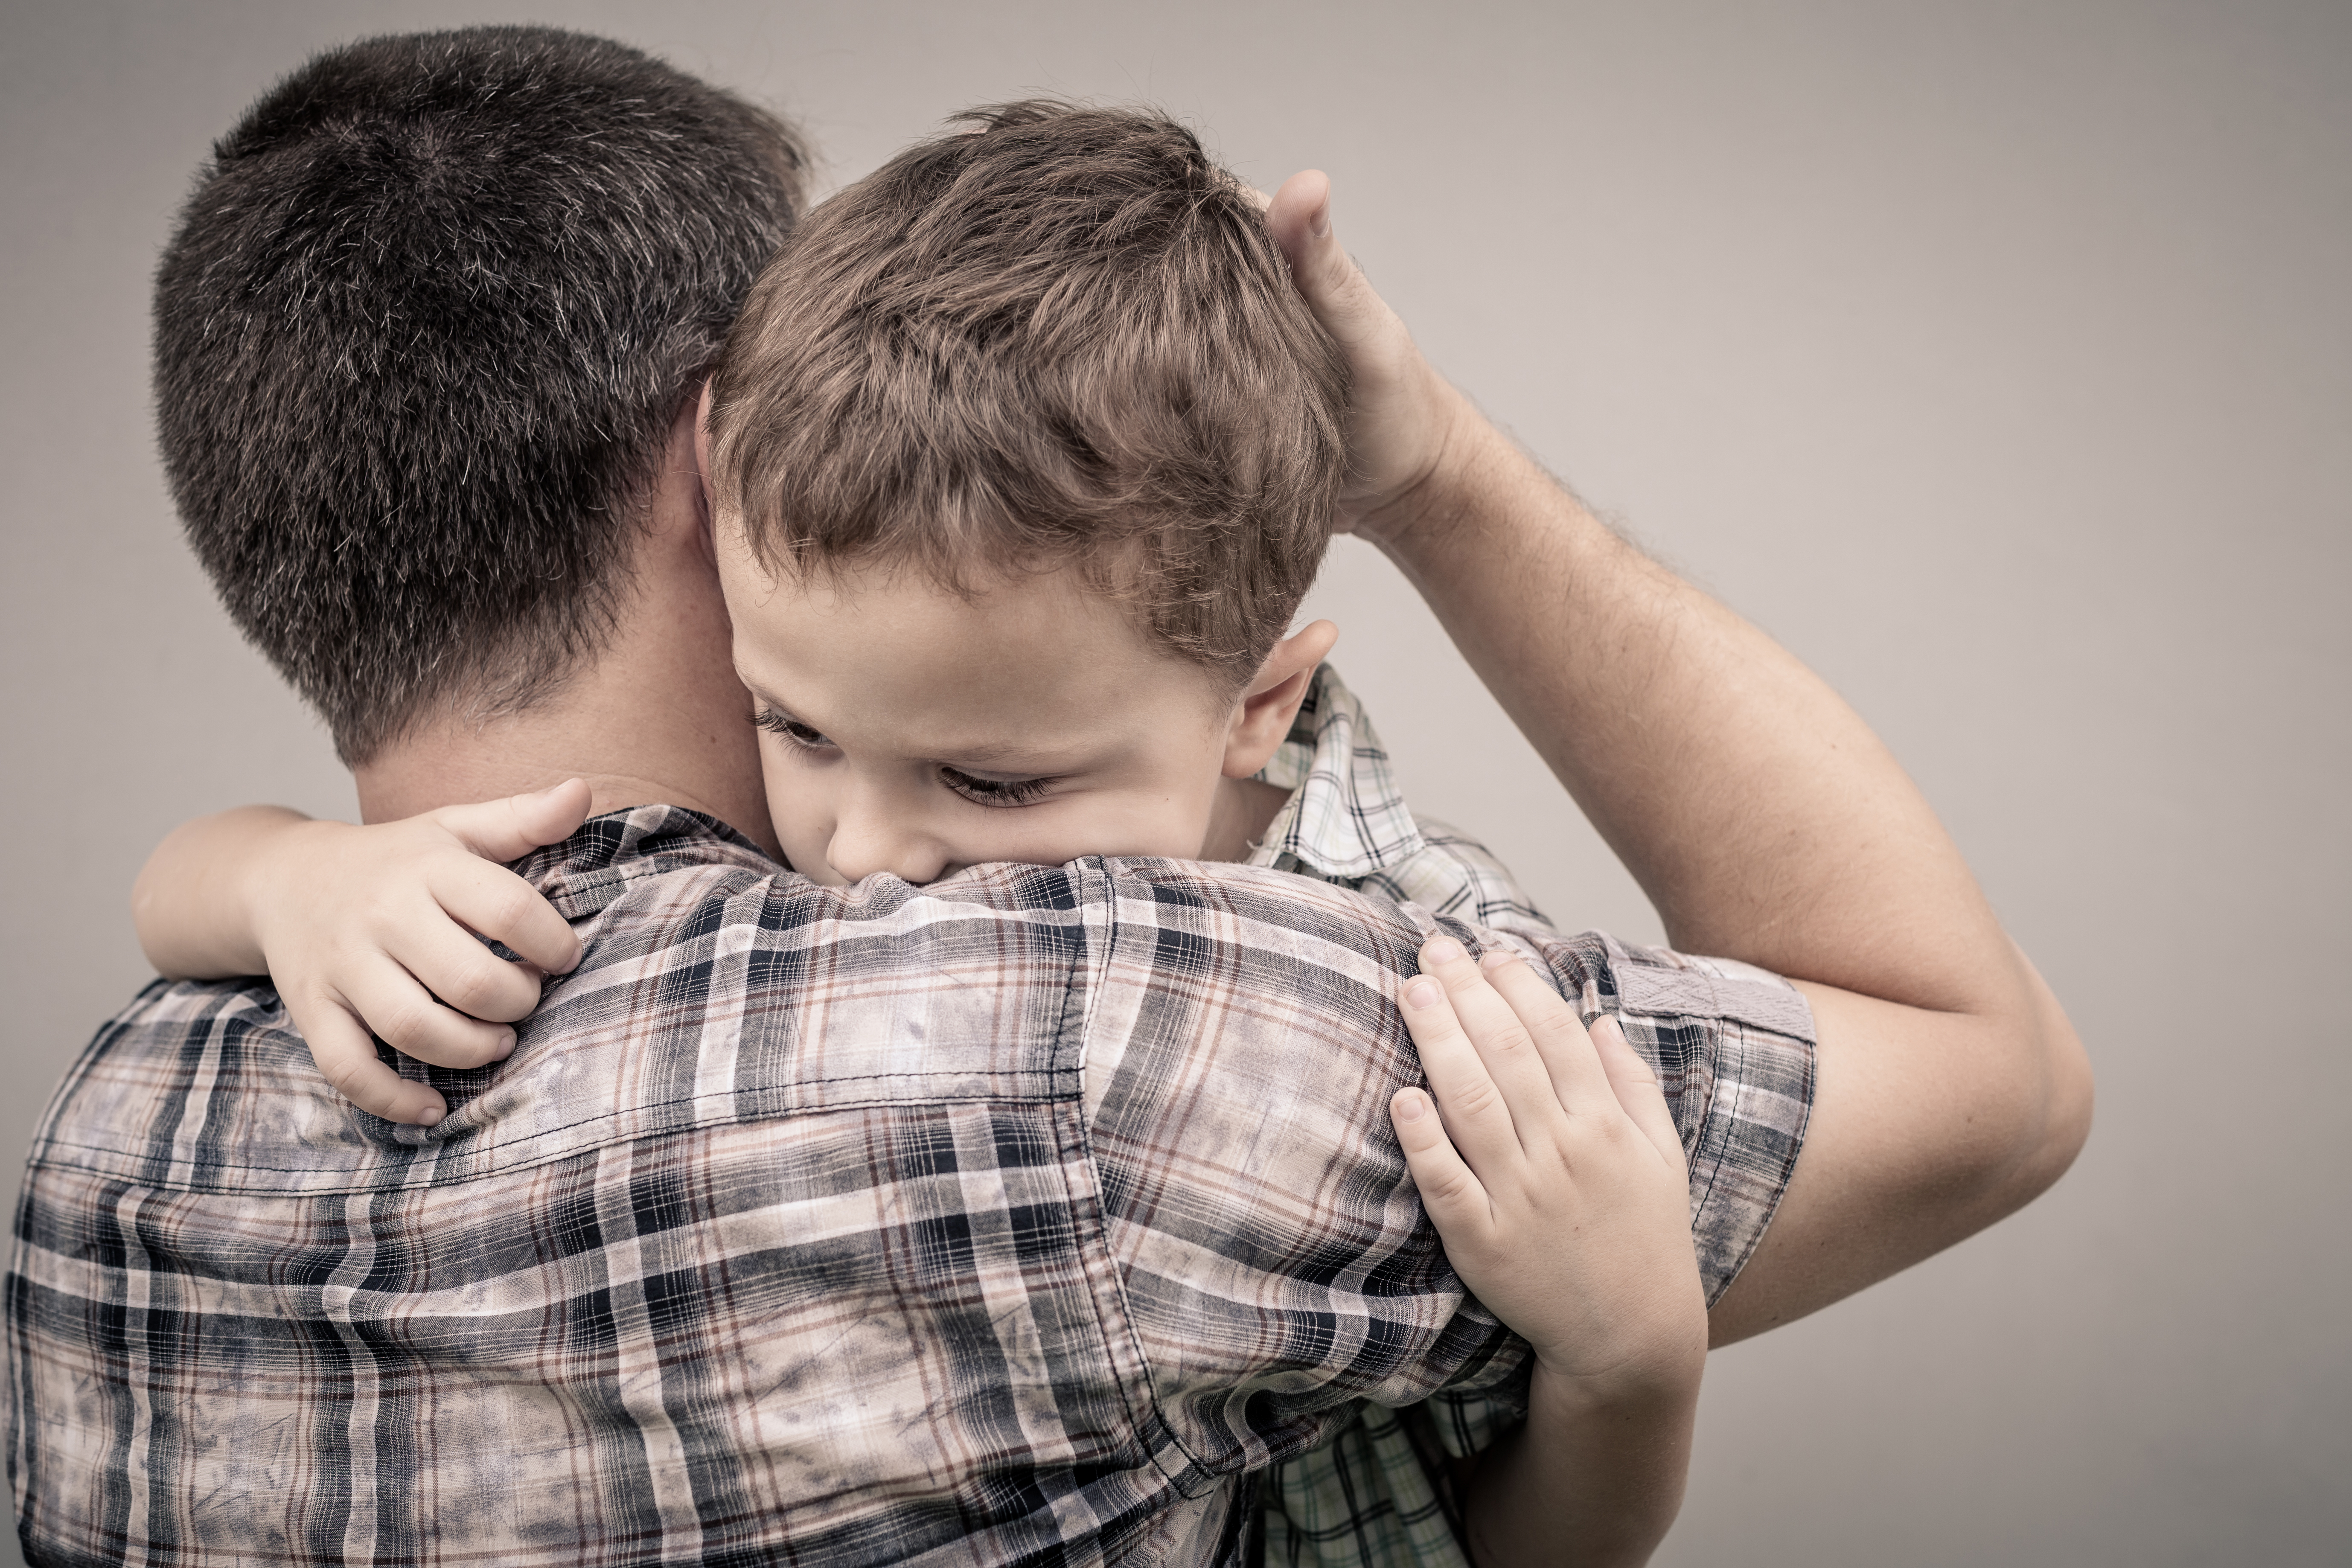 A father hugging his sad-looking son | Source: Shutterstock